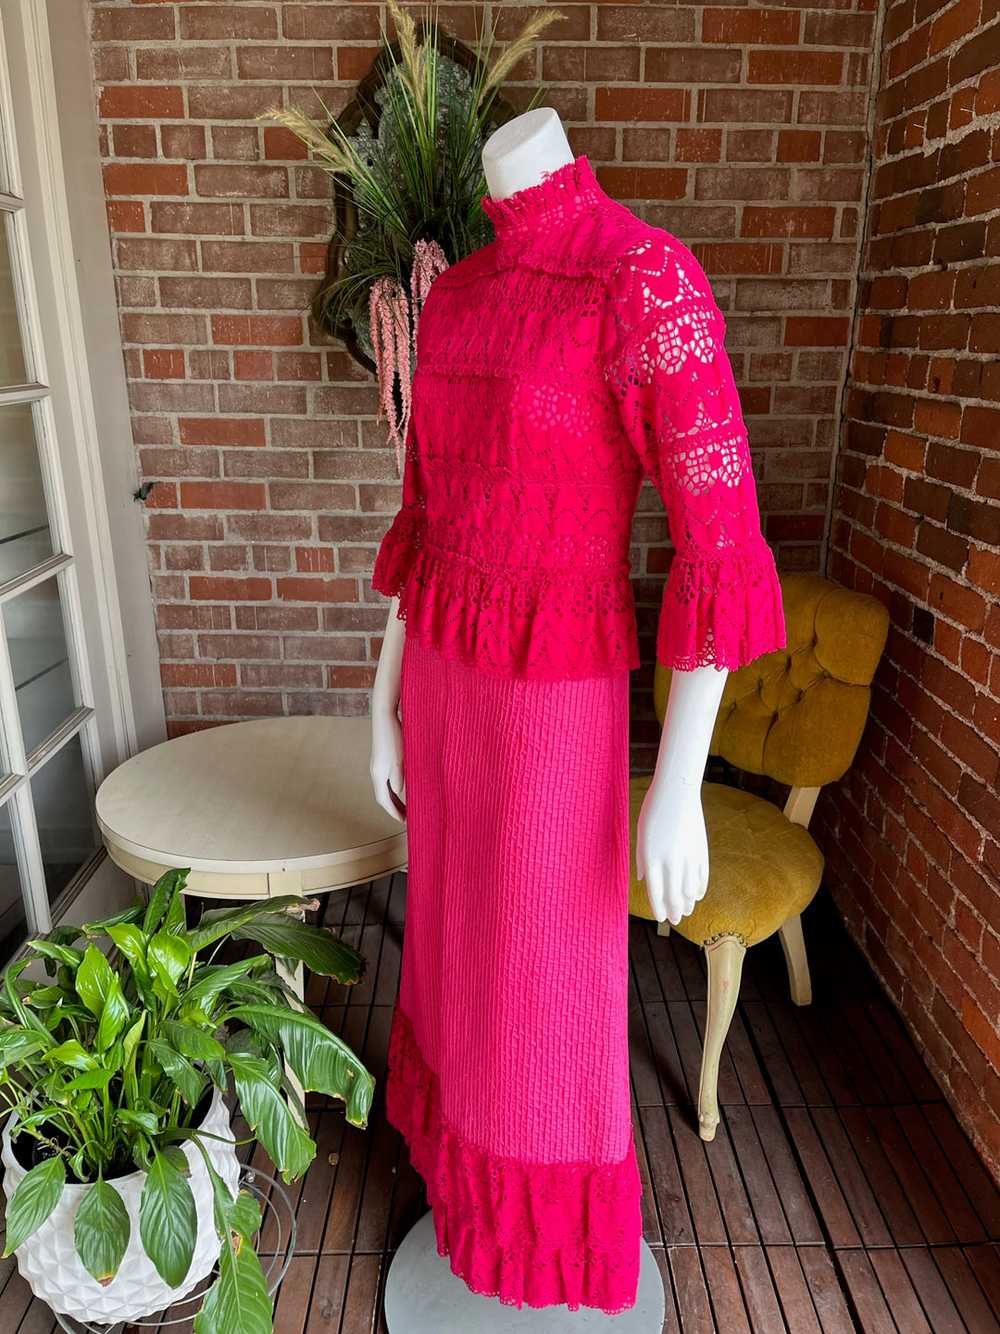 1960s Hot Pink Lace Mexican Dress - image 3